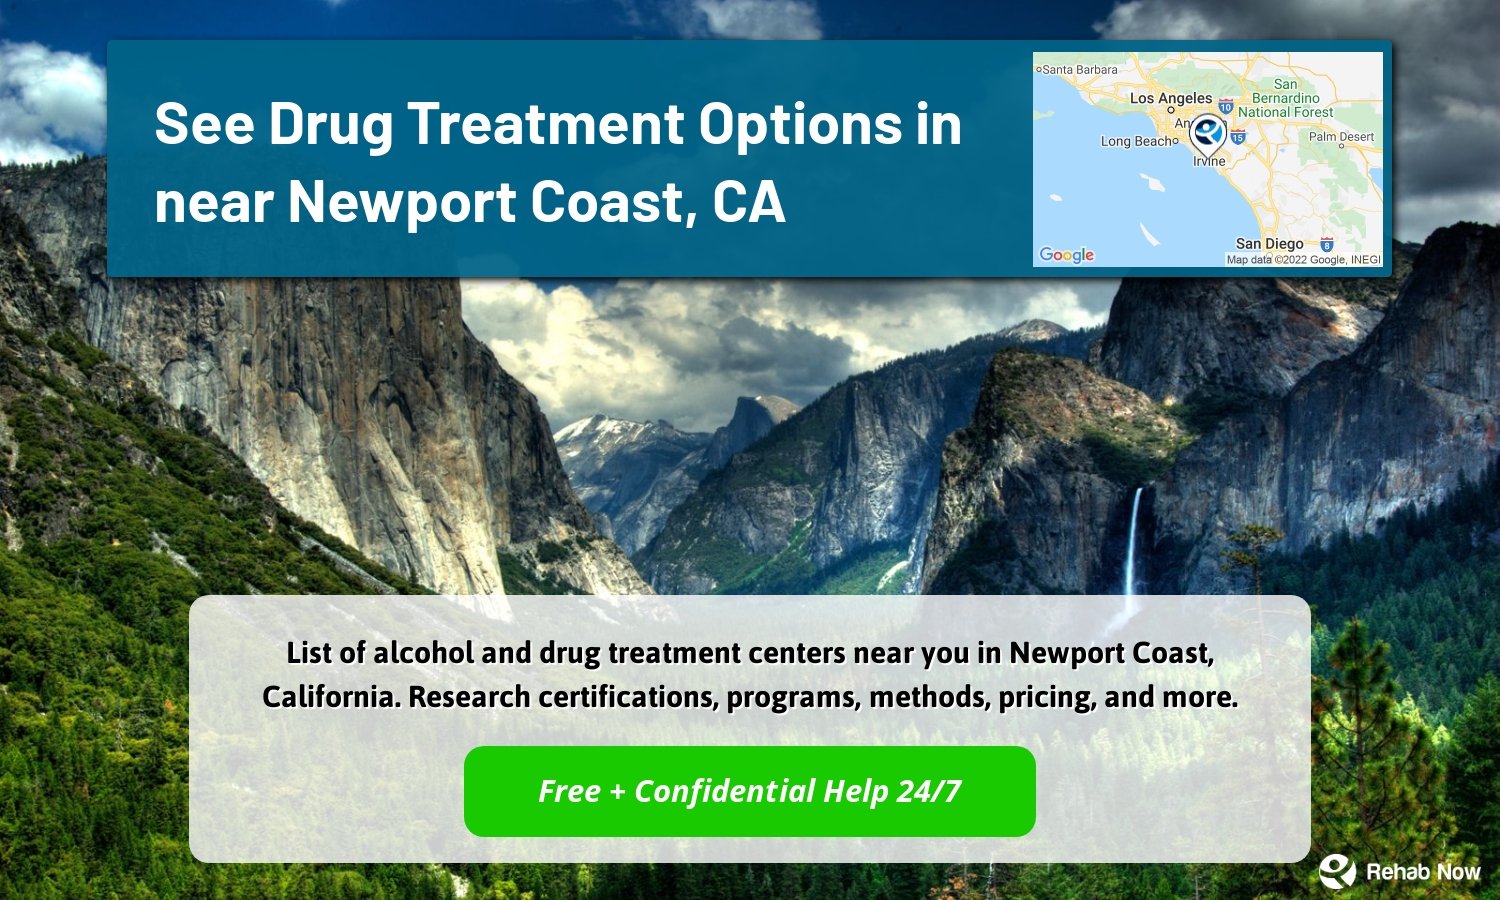 List of alcohol and drug treatment centers near you in Newport Coast, California. Research certifications, programs, methods, pricing, and more.